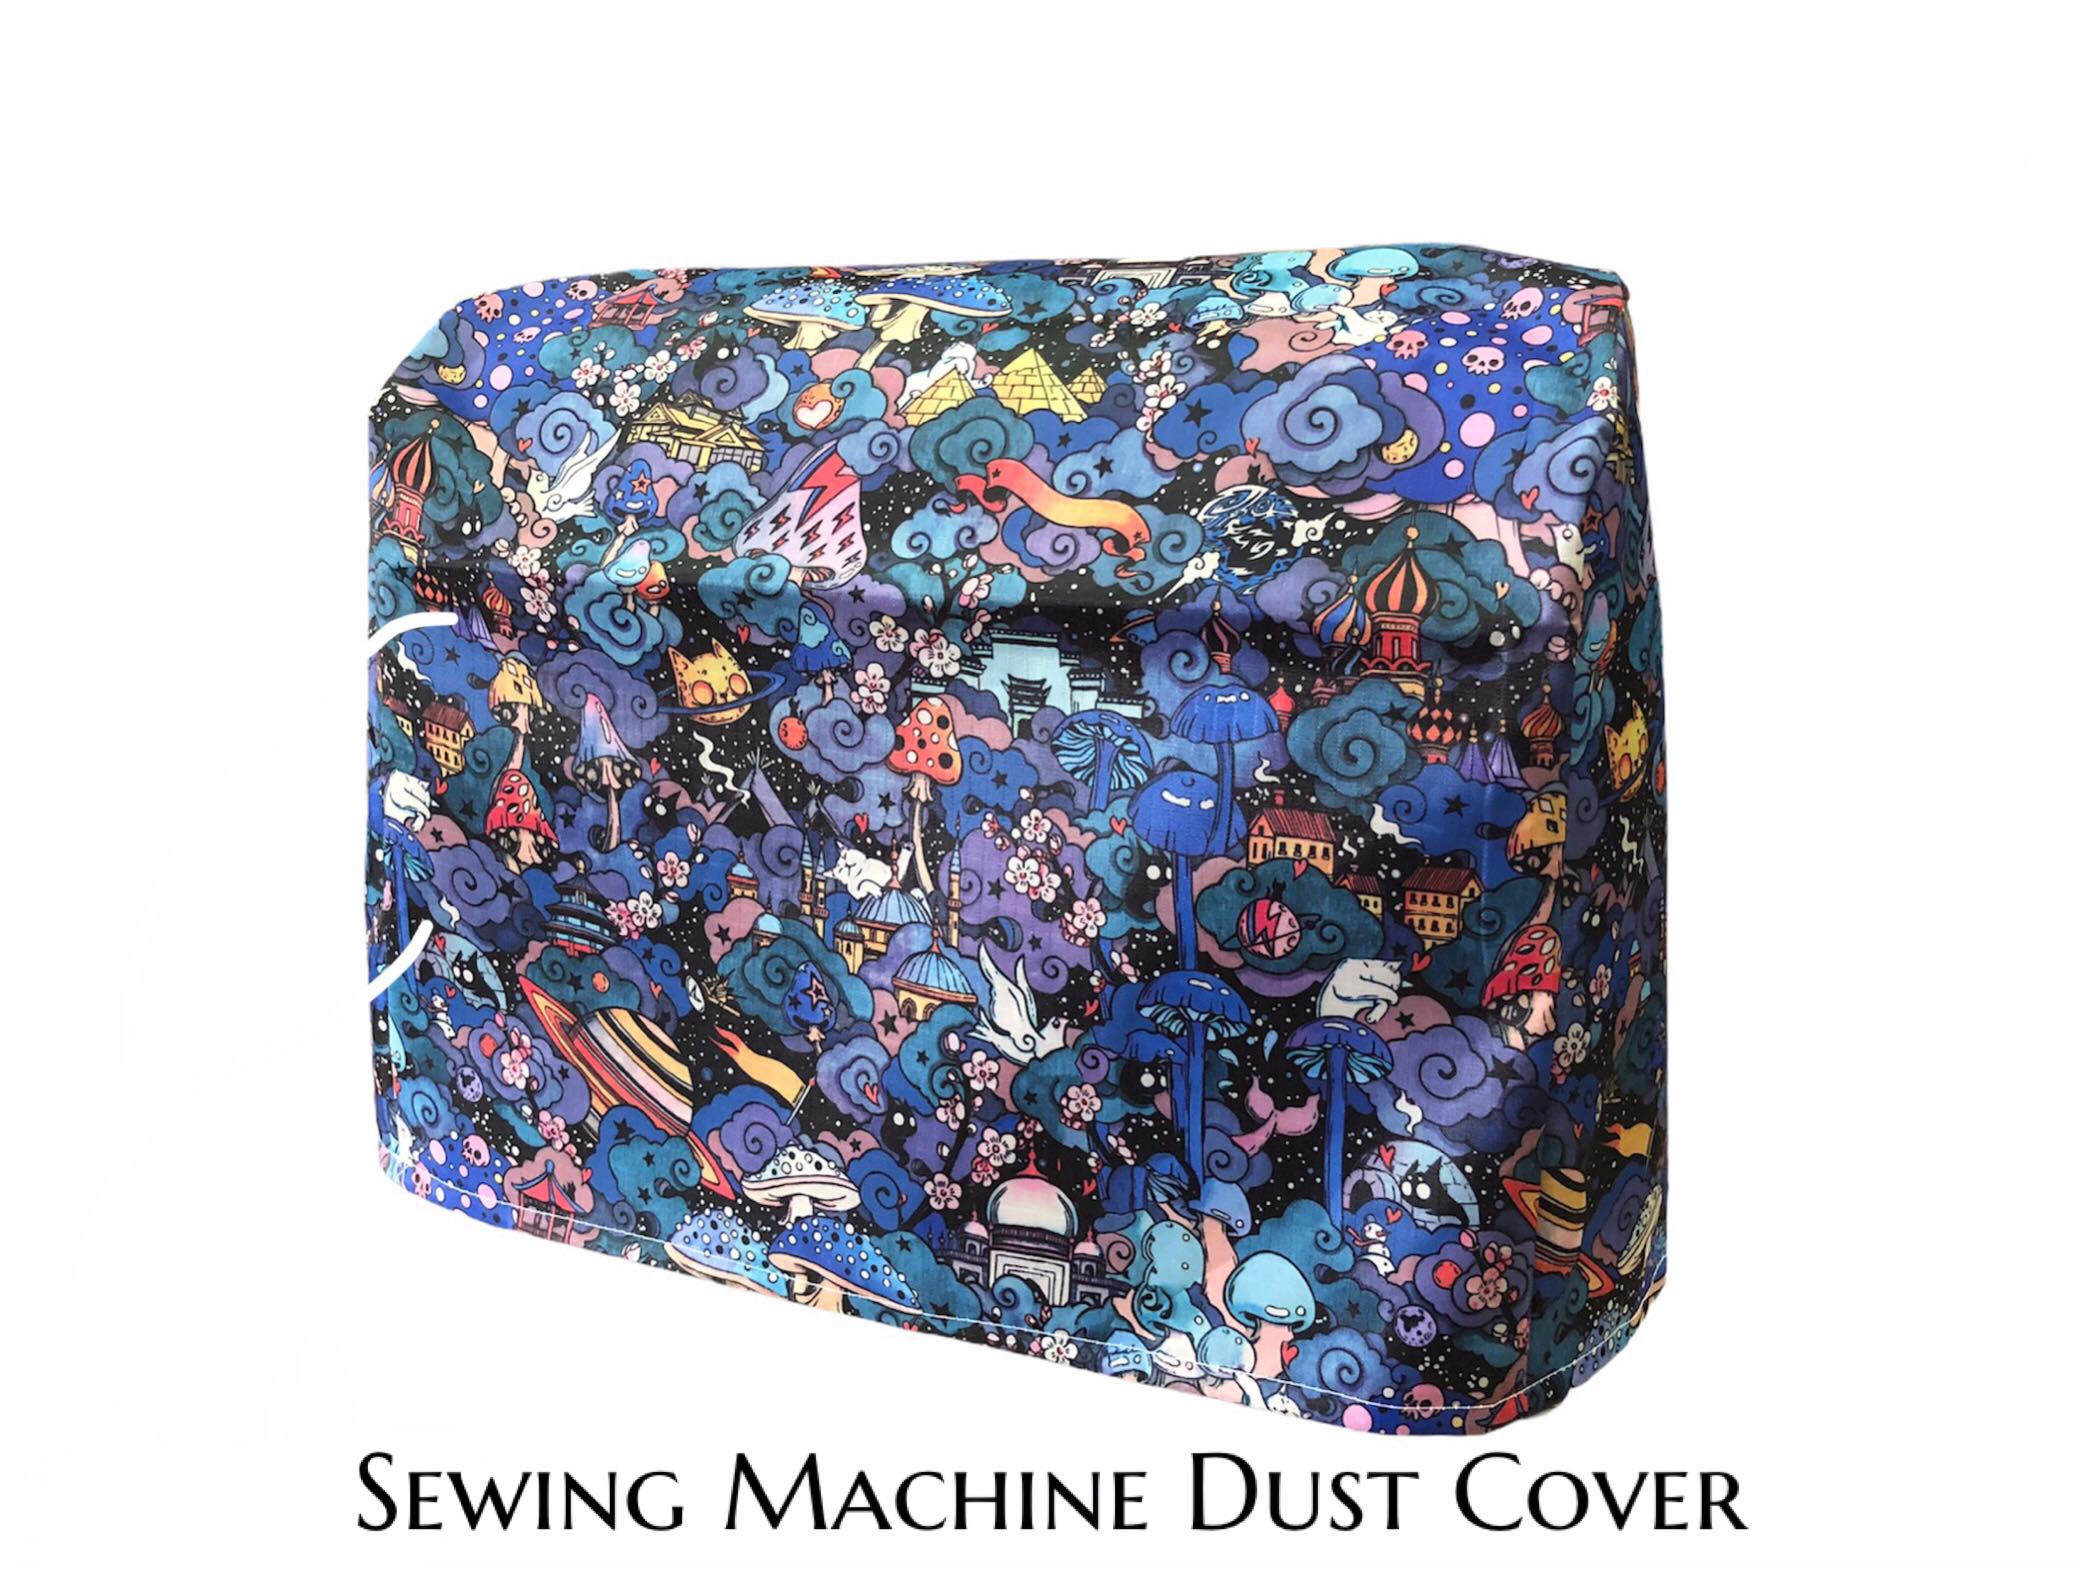 Made to Order Sewing Machine Cover, Dust Cover, Sewing Machine Cover,  Handmade 